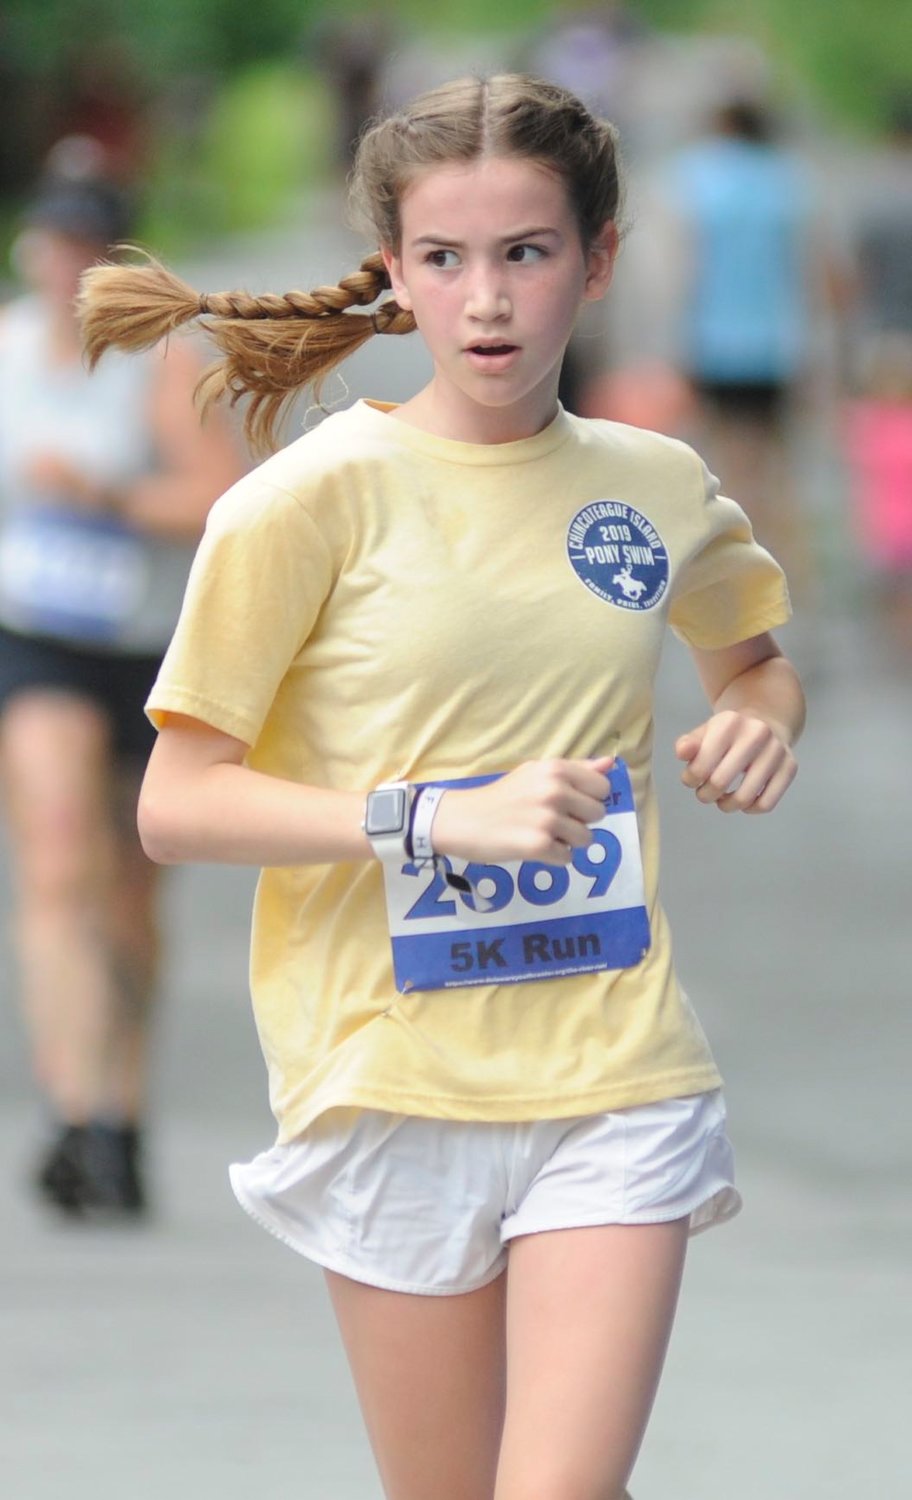 Ponytails. Megan Dowling, a 13-year-old runner, placed 33rd in the female 5K run...